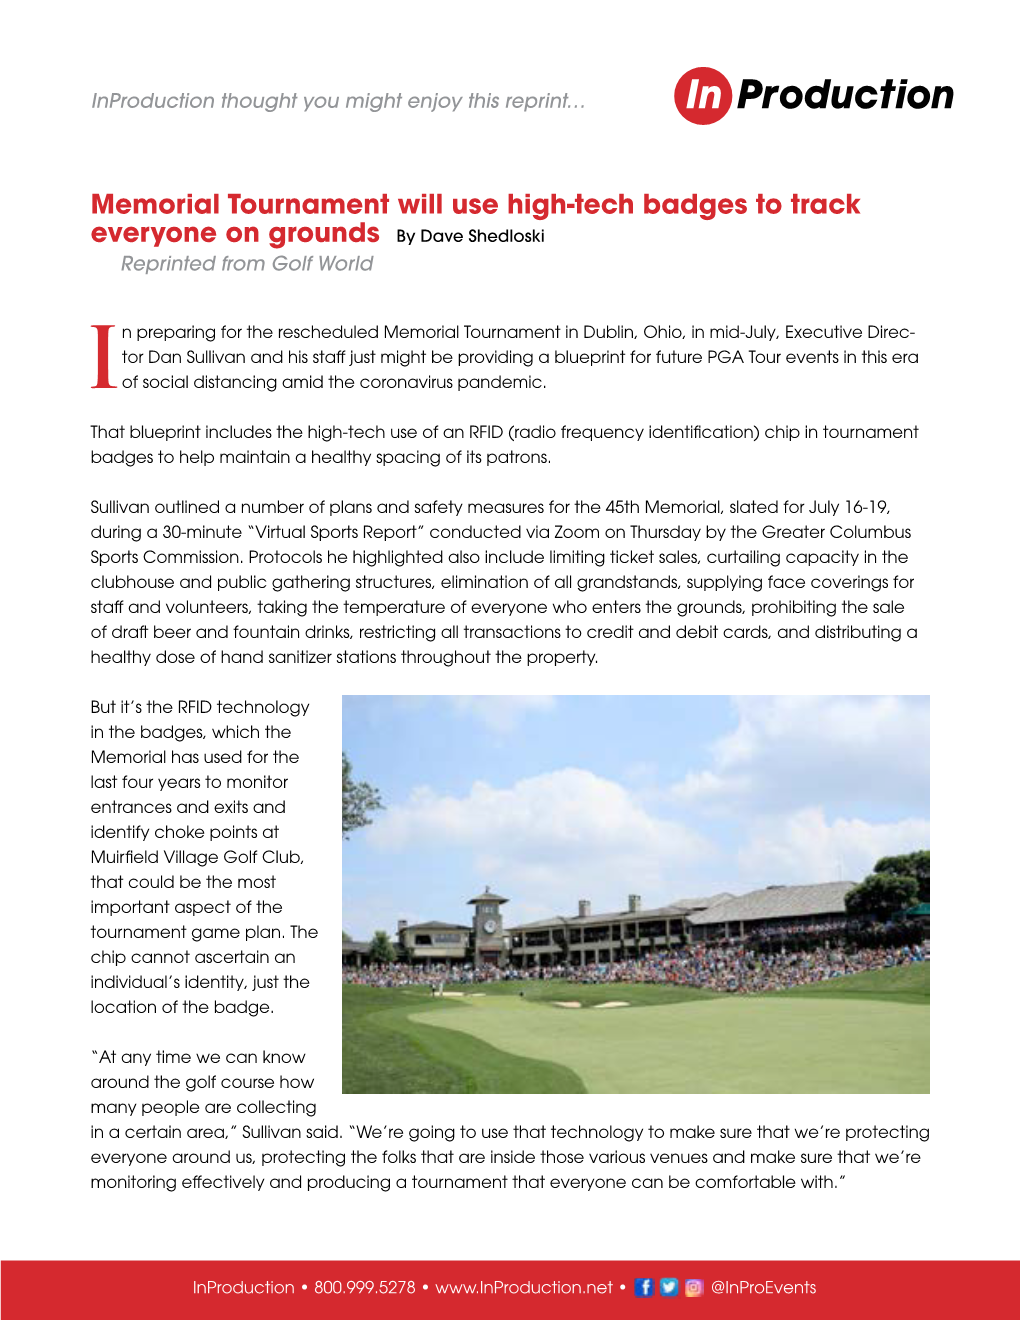 Memorial Tournament Will Use High-Tech Badges to Track Everyone on Grounds by Dave Shedloski Reprinted from Golf World